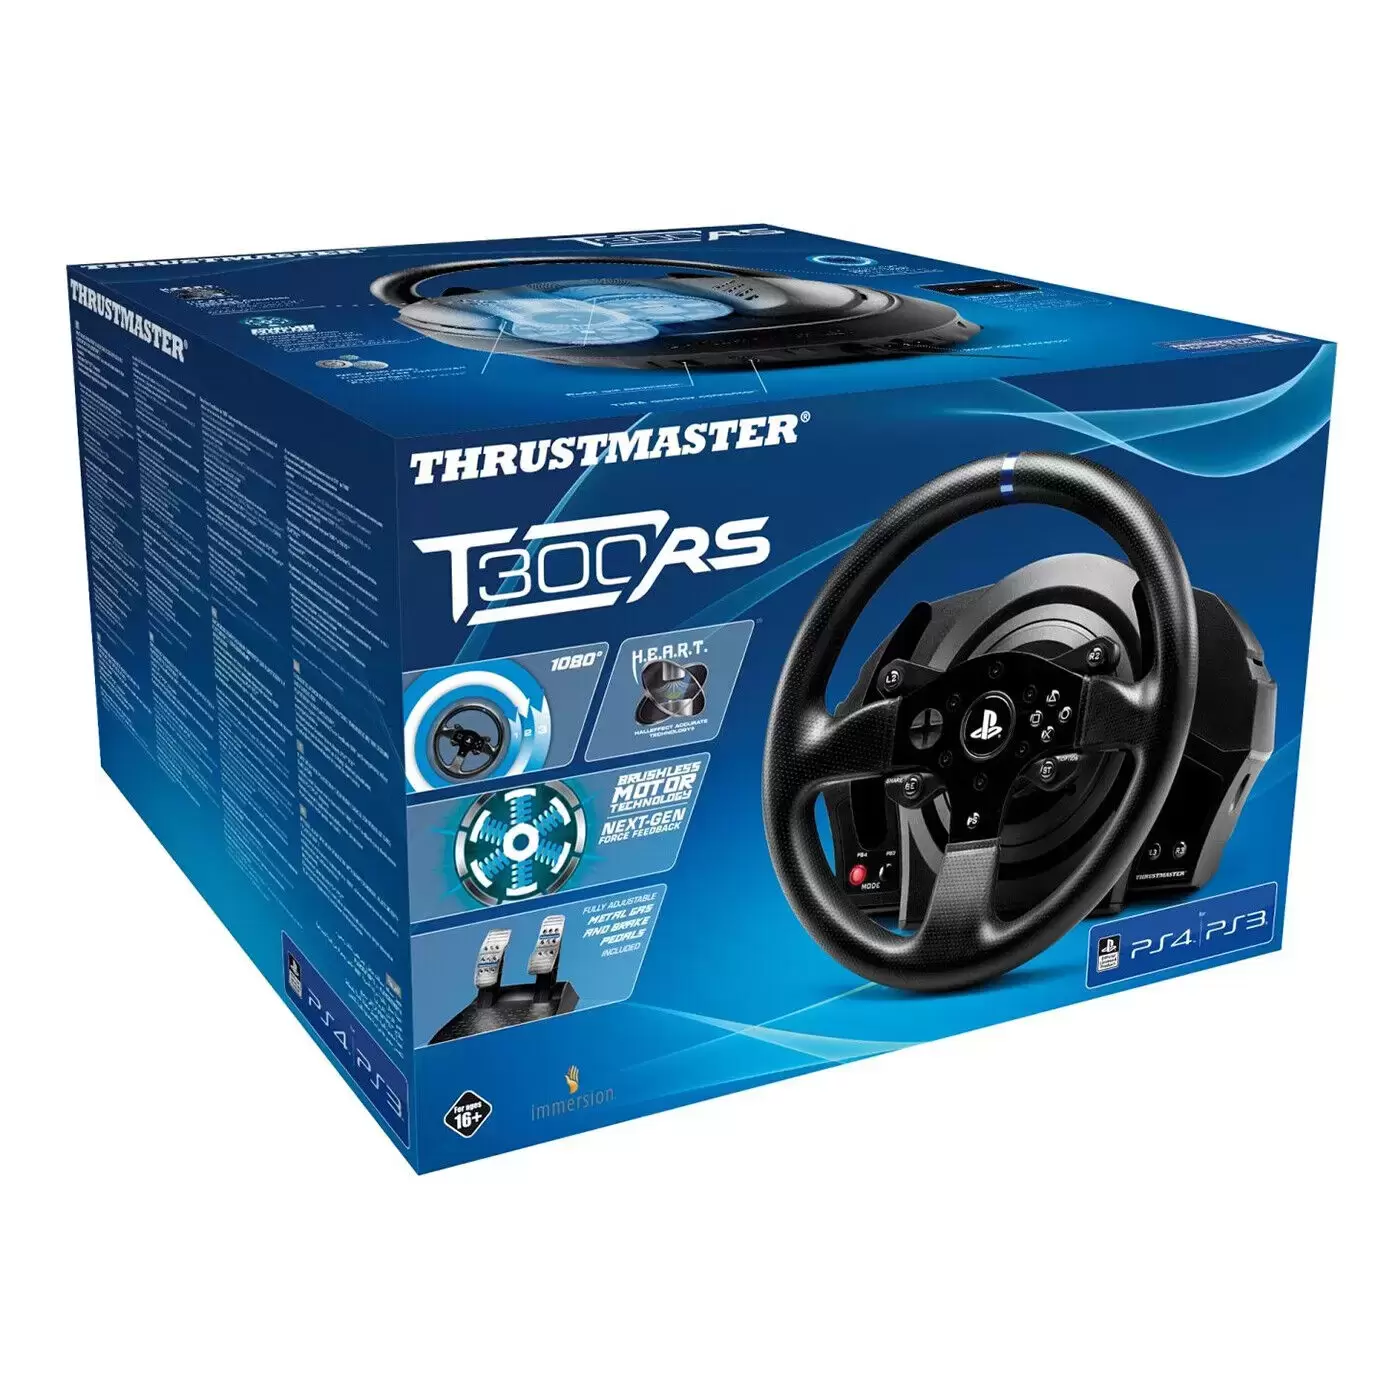 Pc Racing Simulator Steering Wheel For Thrustmaster T300rs T300